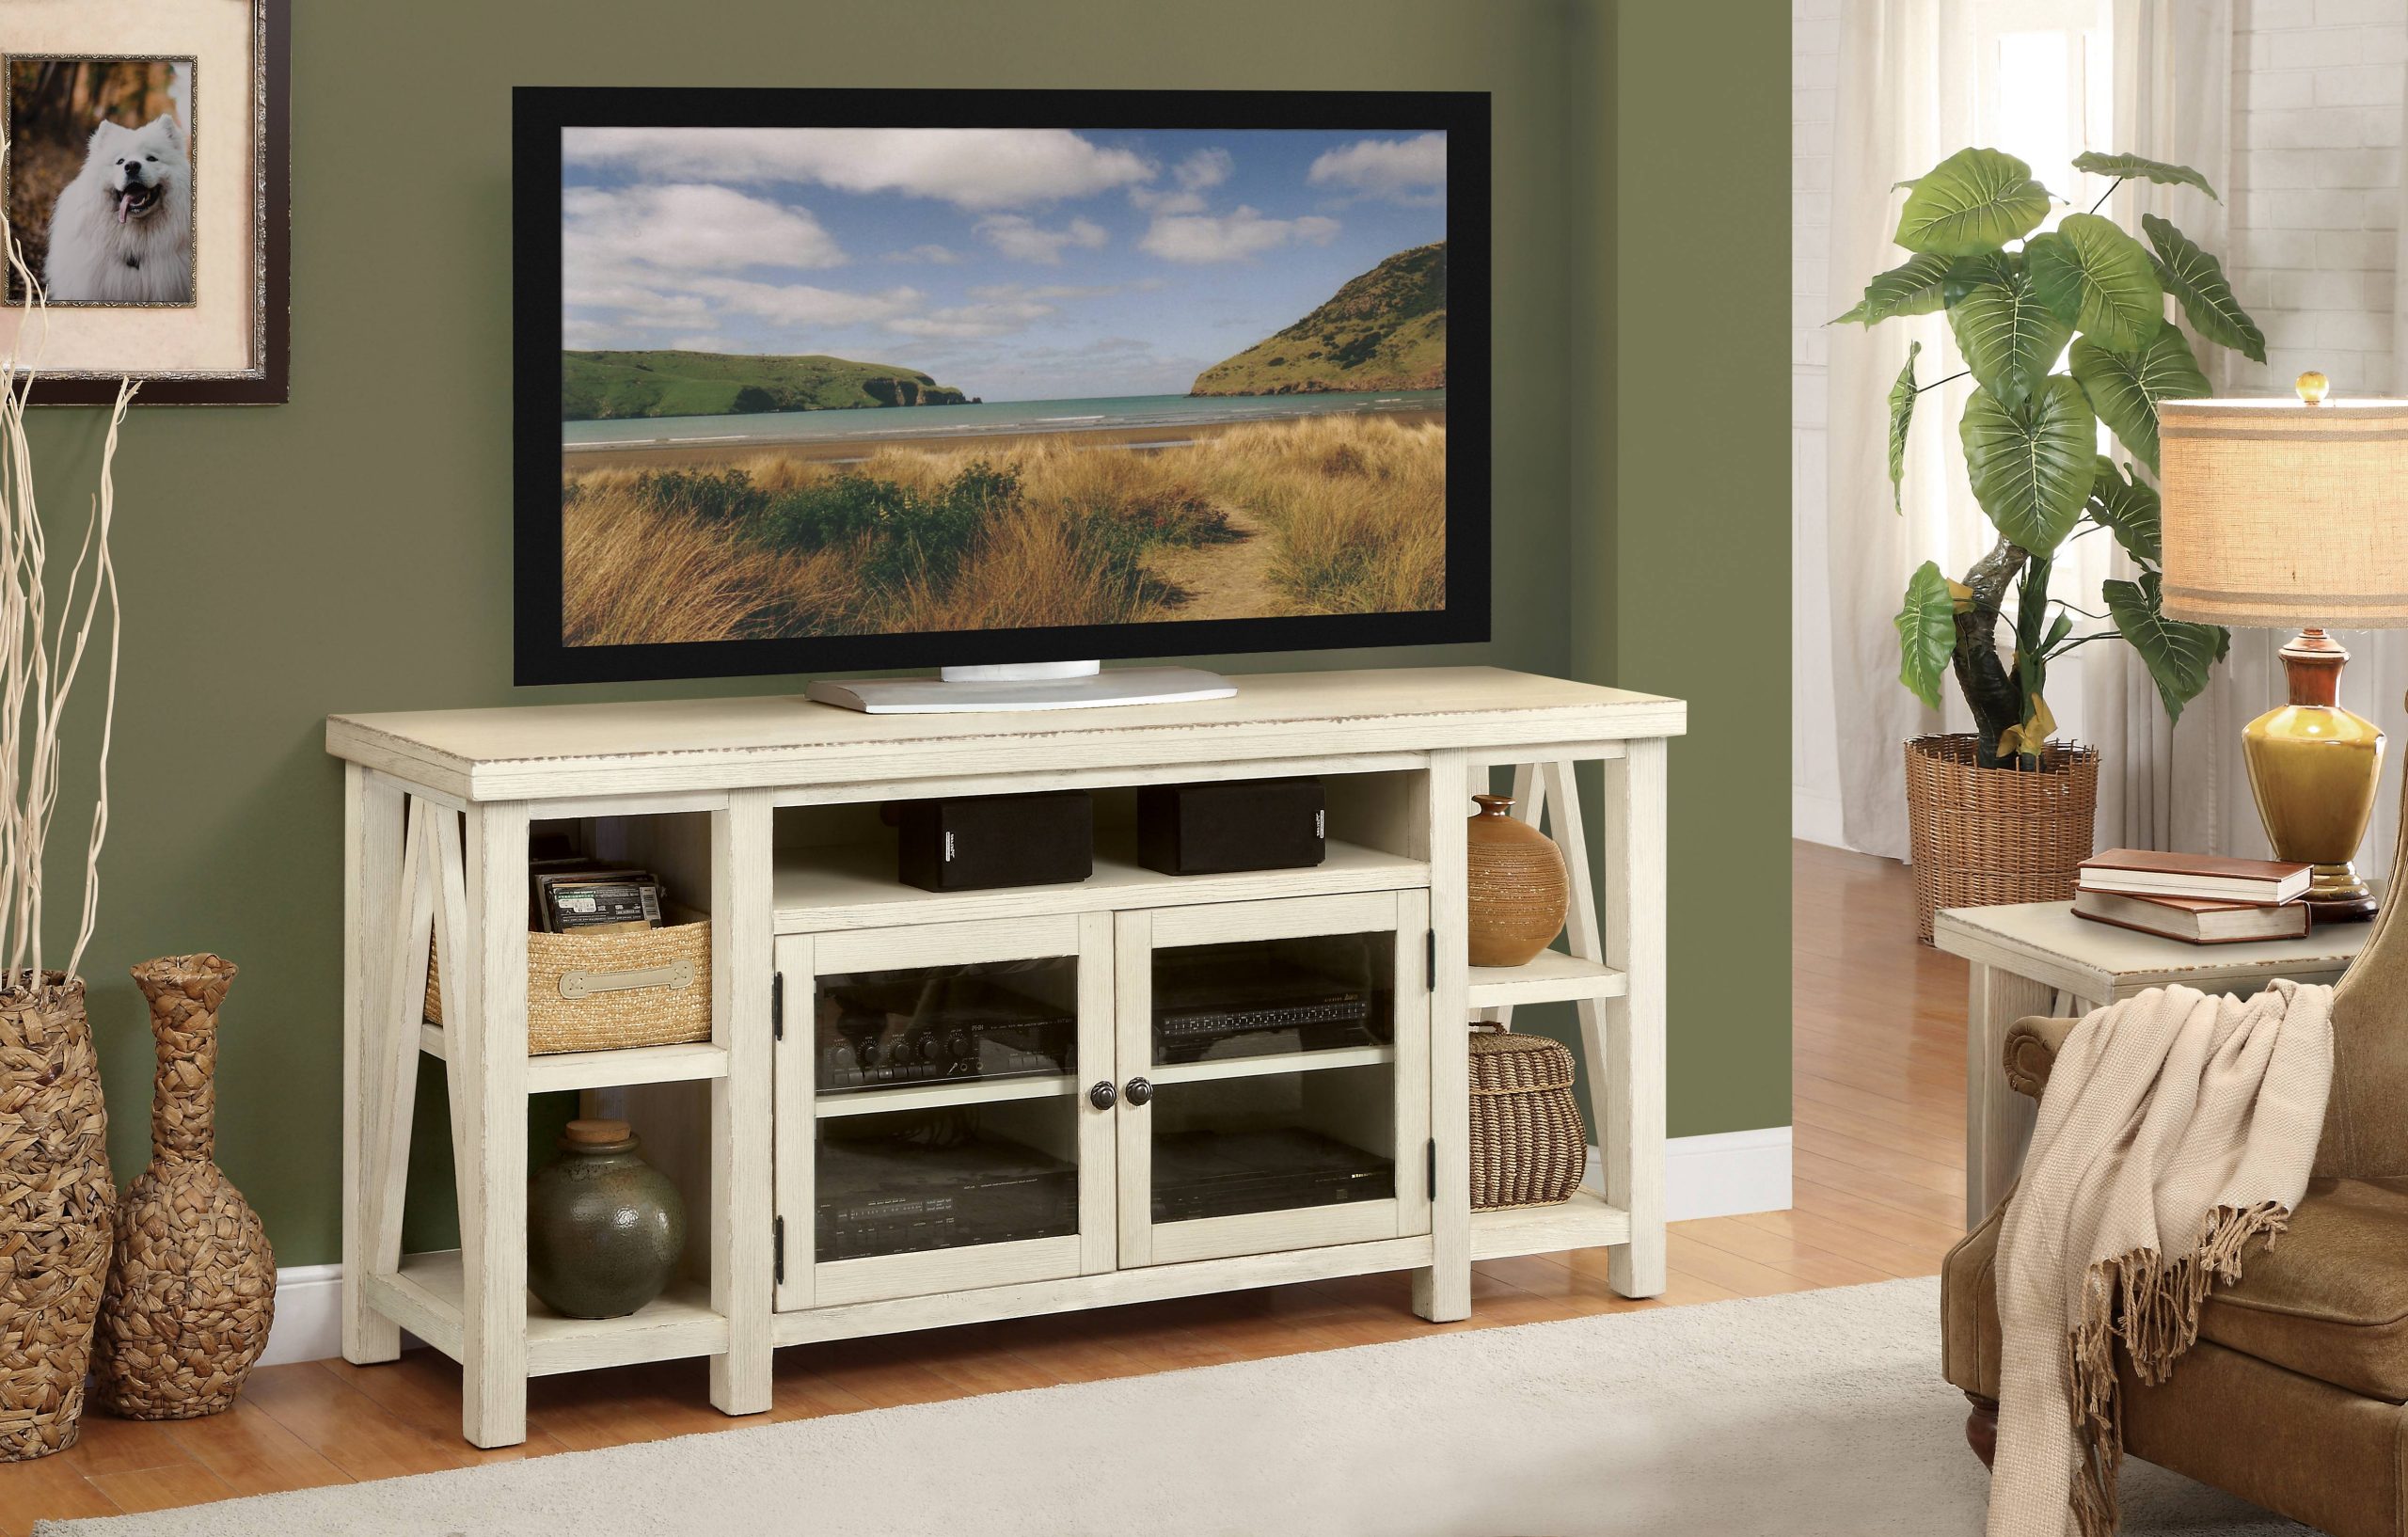 a flat screen tv sitting on top of a white entertainment center